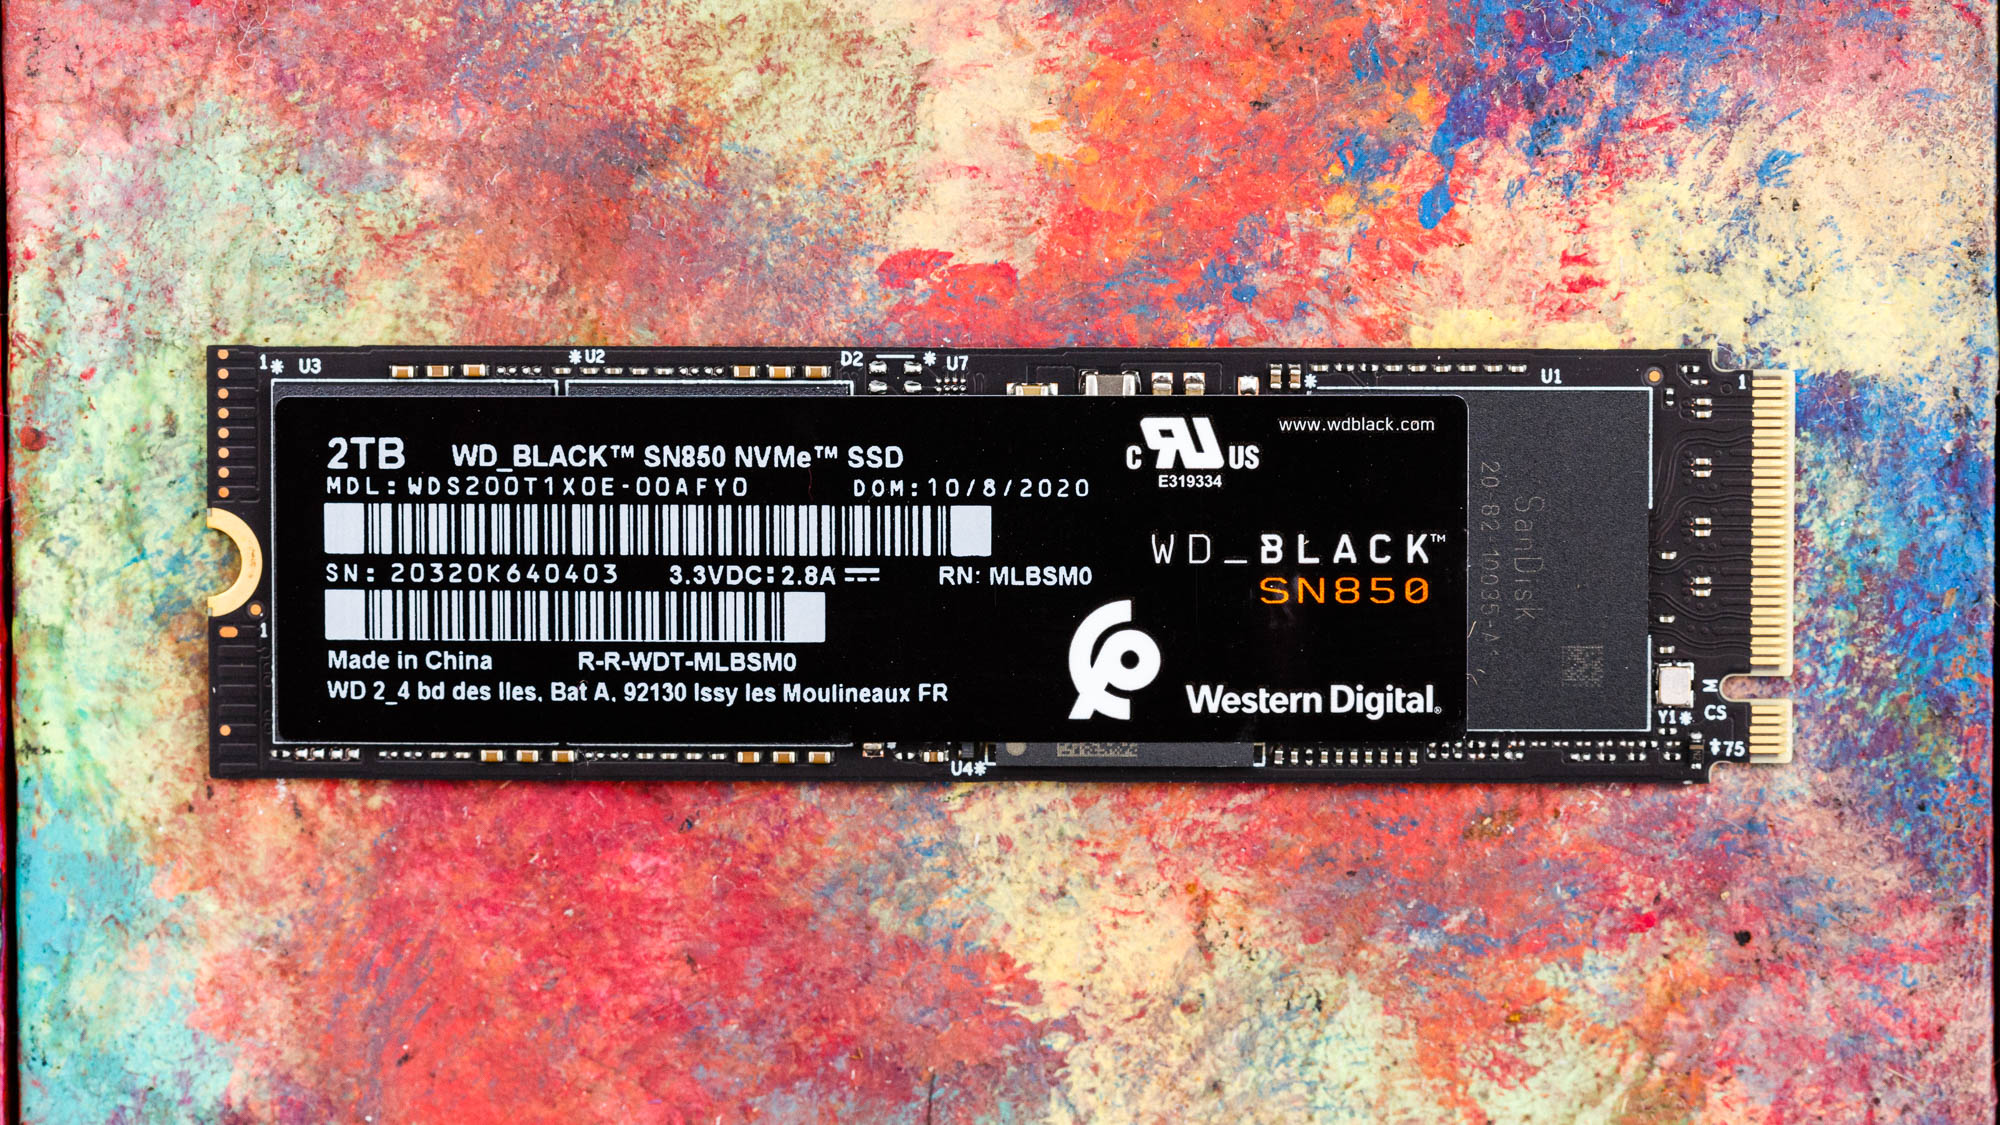 Wd Black Sn850 M 2 Nvme Ssd Review Top Tier Storage For Gamers And Pros Updated Tom S Hardware